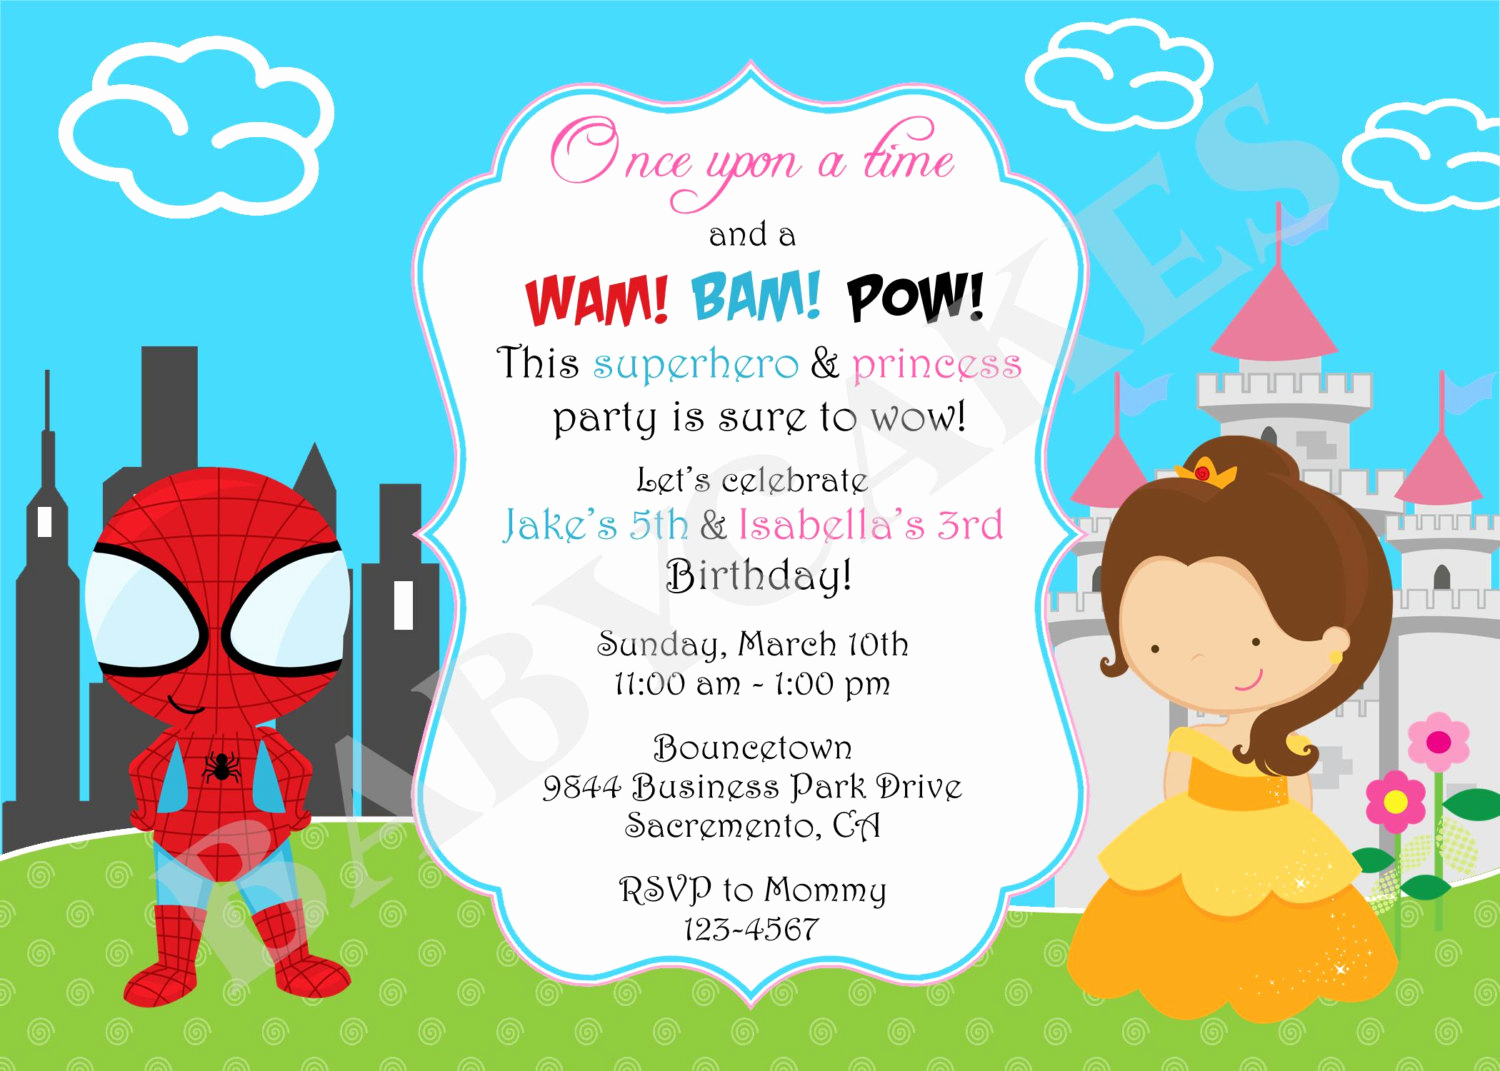 Princess Party Invitation Wording Best Of Superhero Princess Birthday Invitation Invite by Jcbabycakes